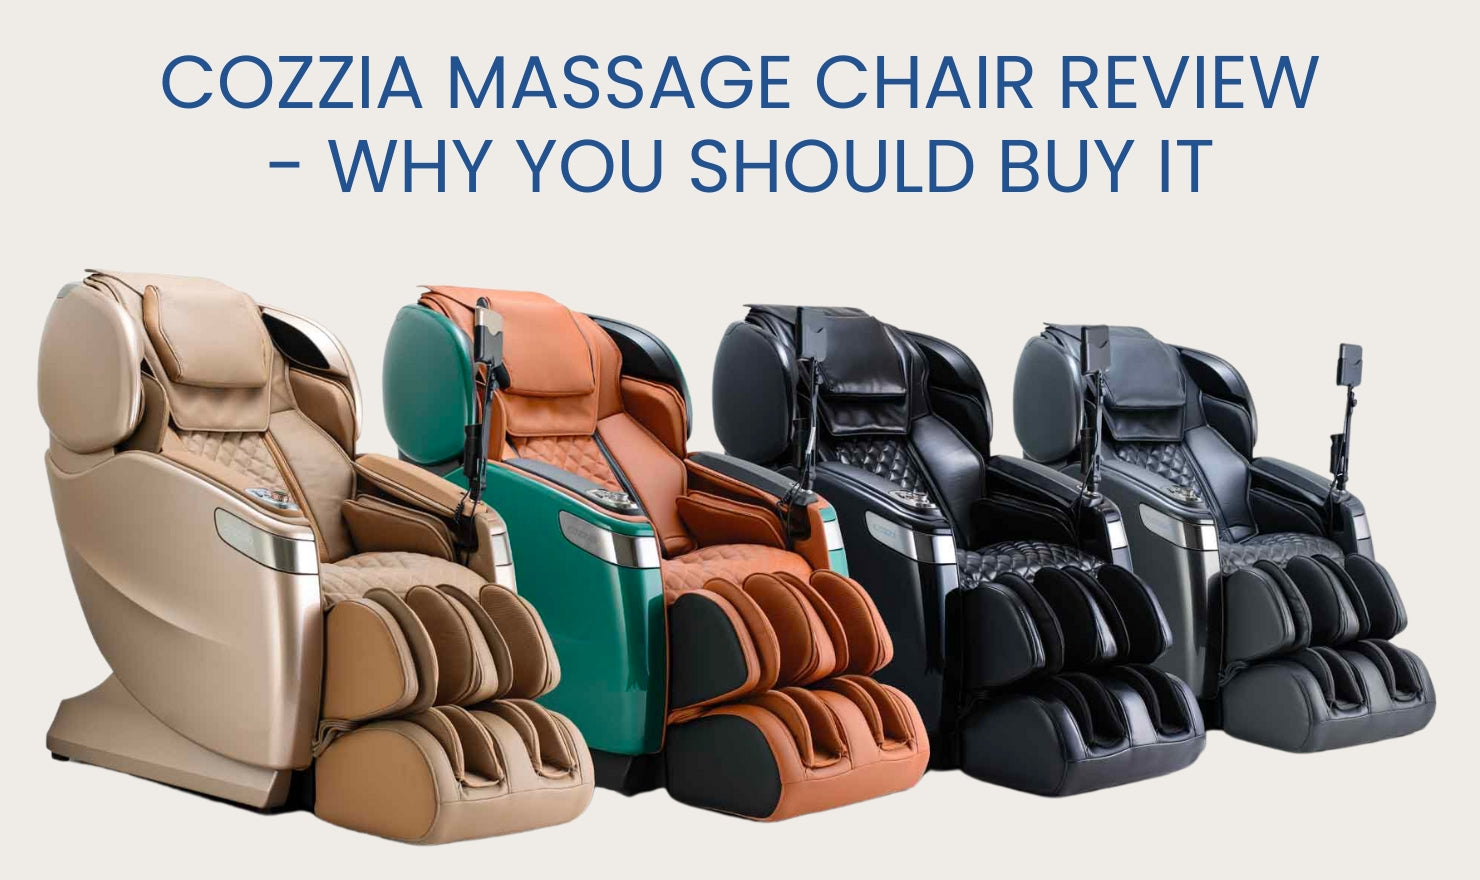 Cozzia Massage Chair Review - Why You Should Buy It